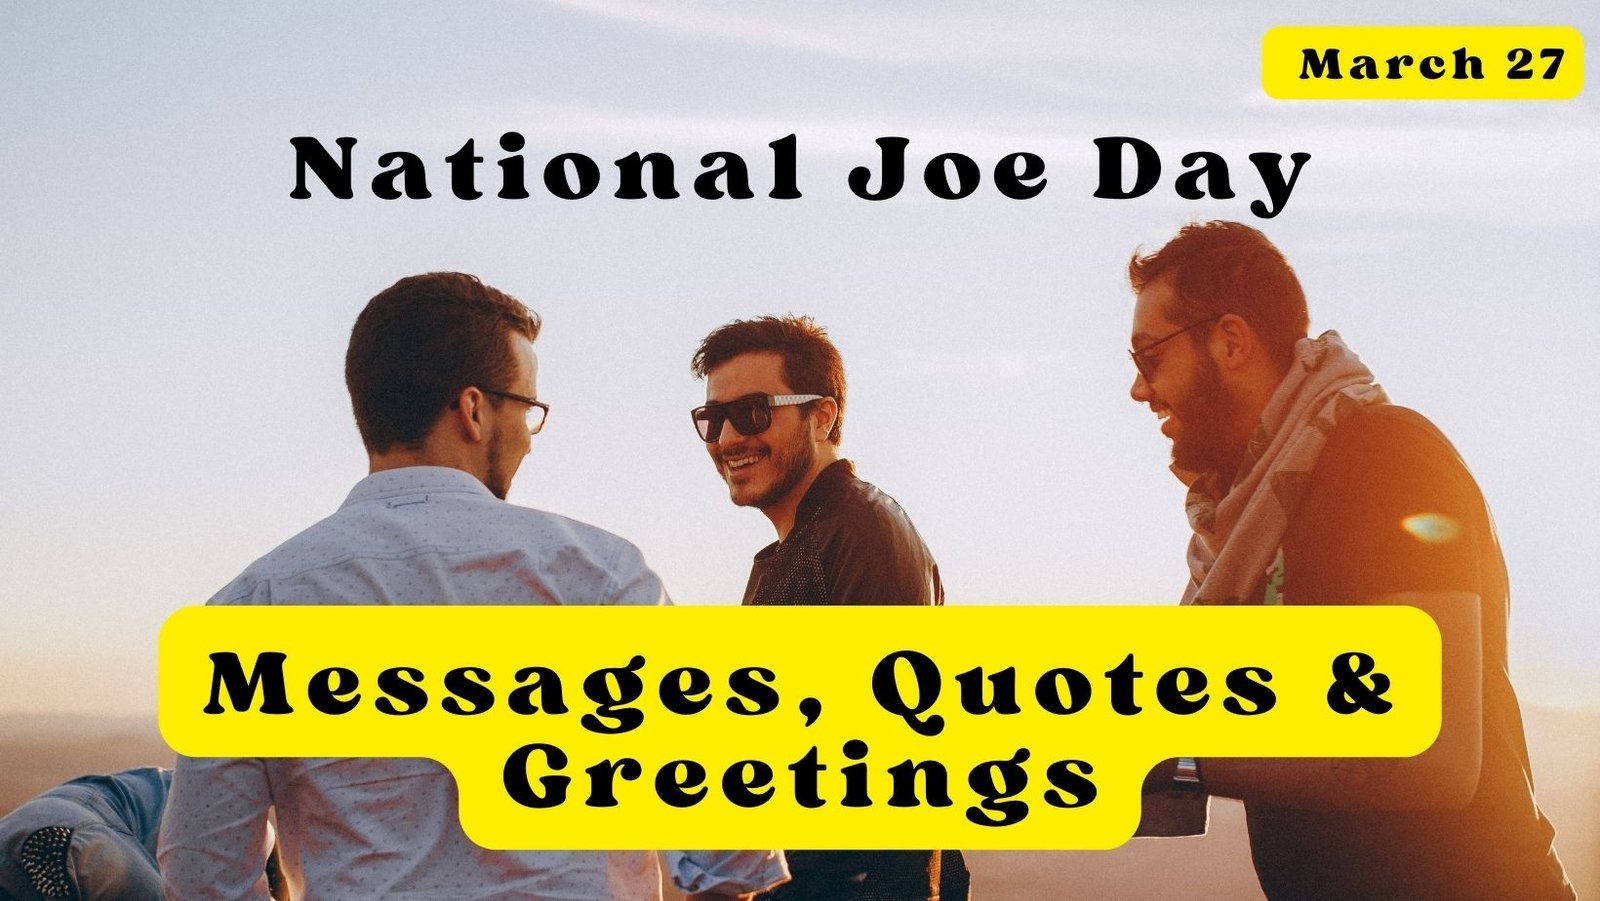 National Joe Day: Messages, Quotes & Greetings – March 27